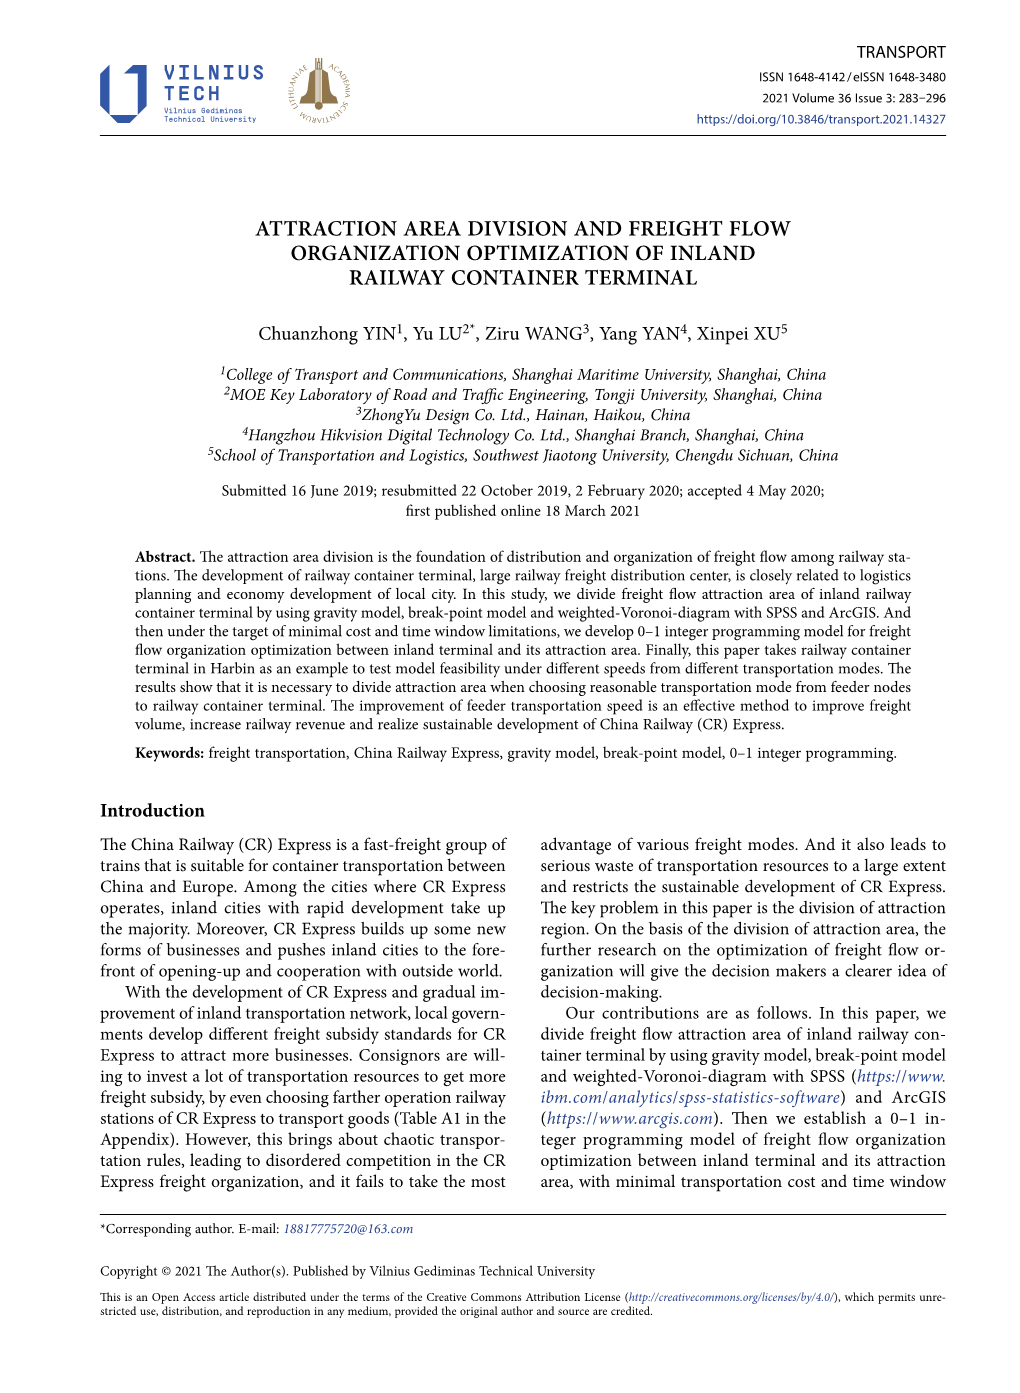 Attraction Area Division and Freight Flow Organization Optimization of Inland Railway Container Terminal